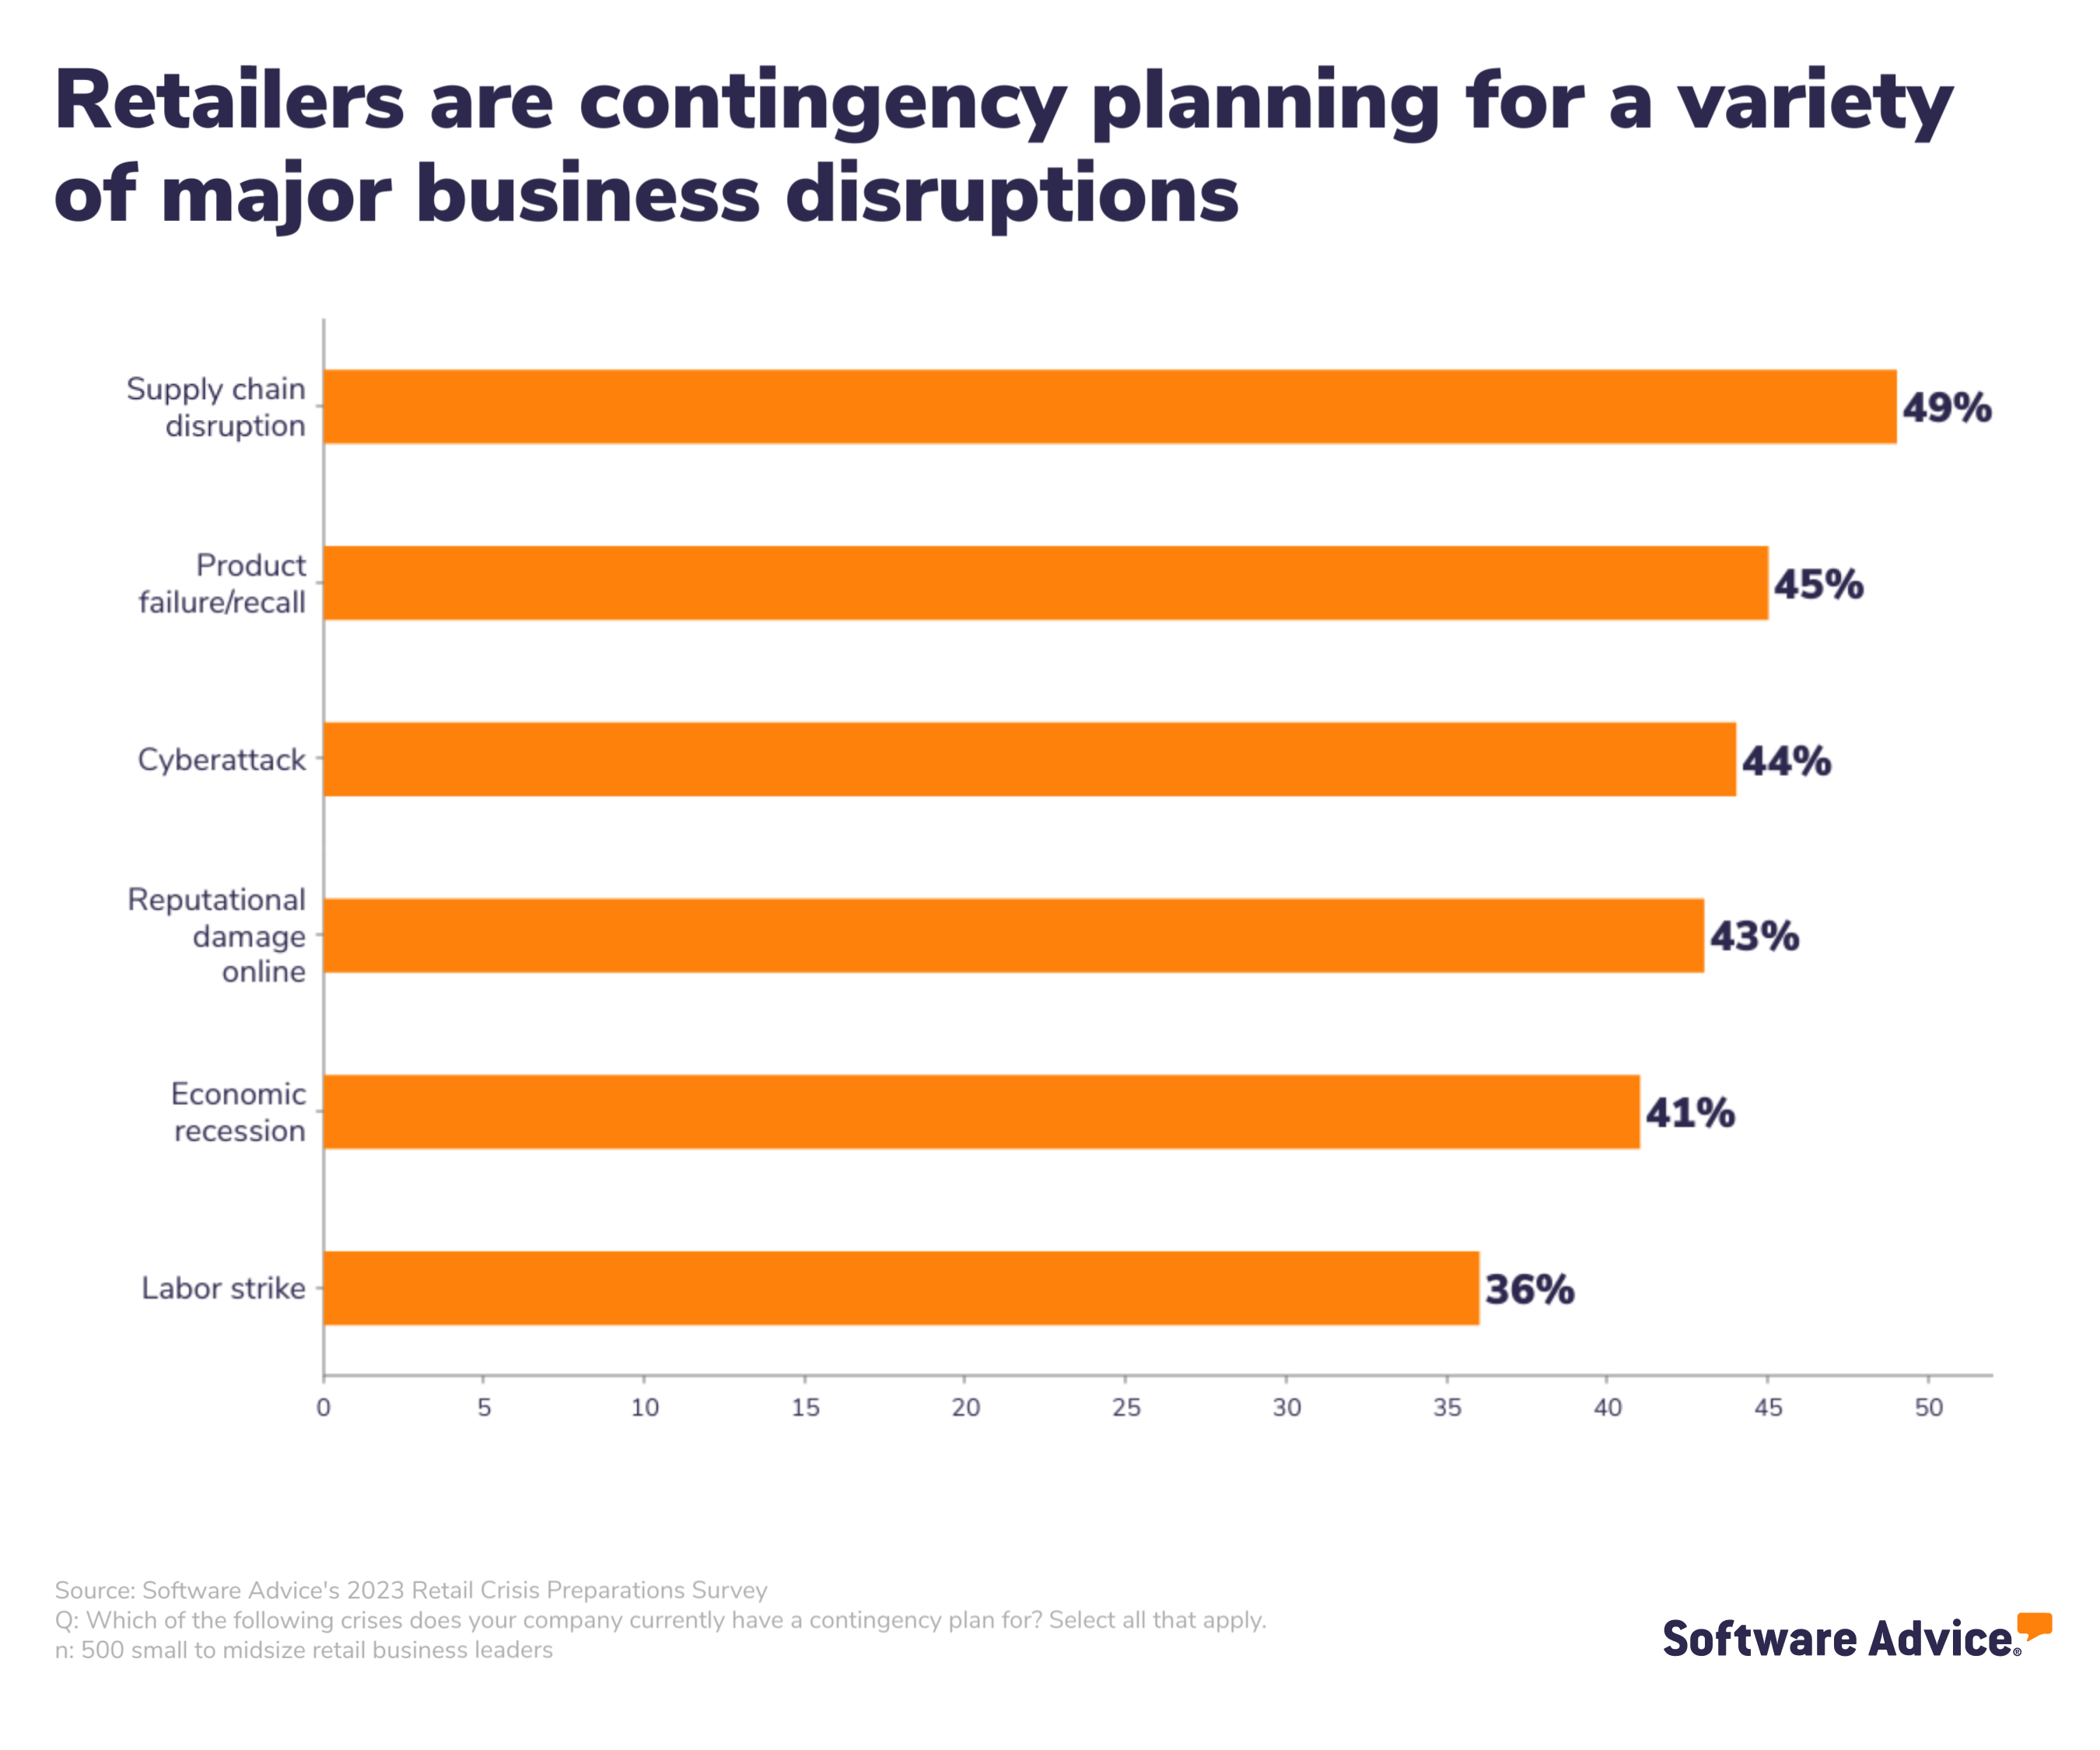 Bar chart showing how many retailers have contingency plans for different crises.